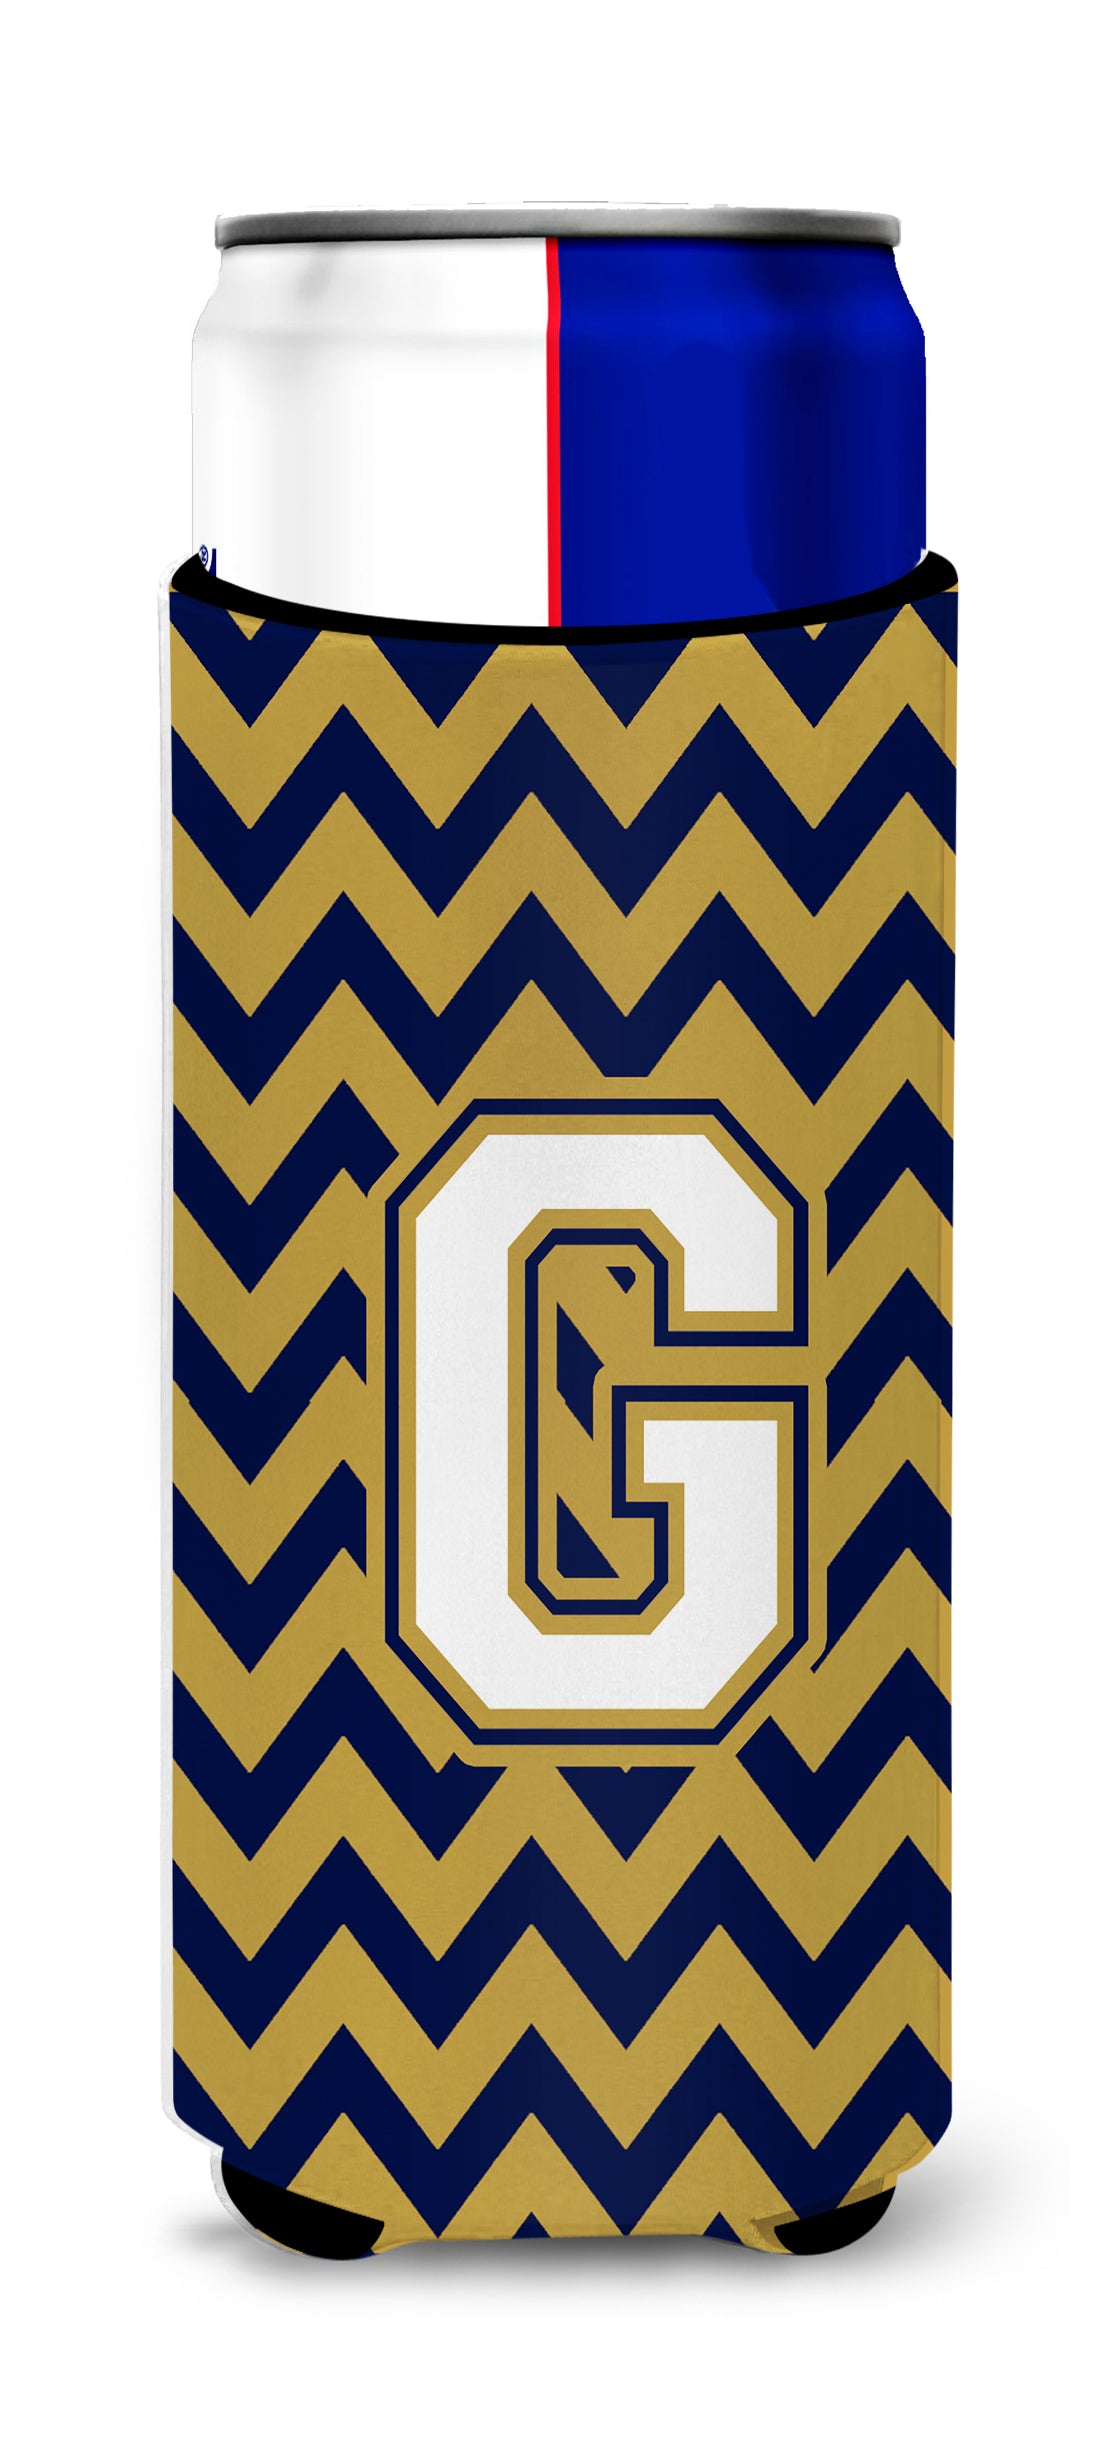 Letter G Chevron Navy Blue and Gold Ultra Beverage Insulators for slim cans CJ1057-GMUK